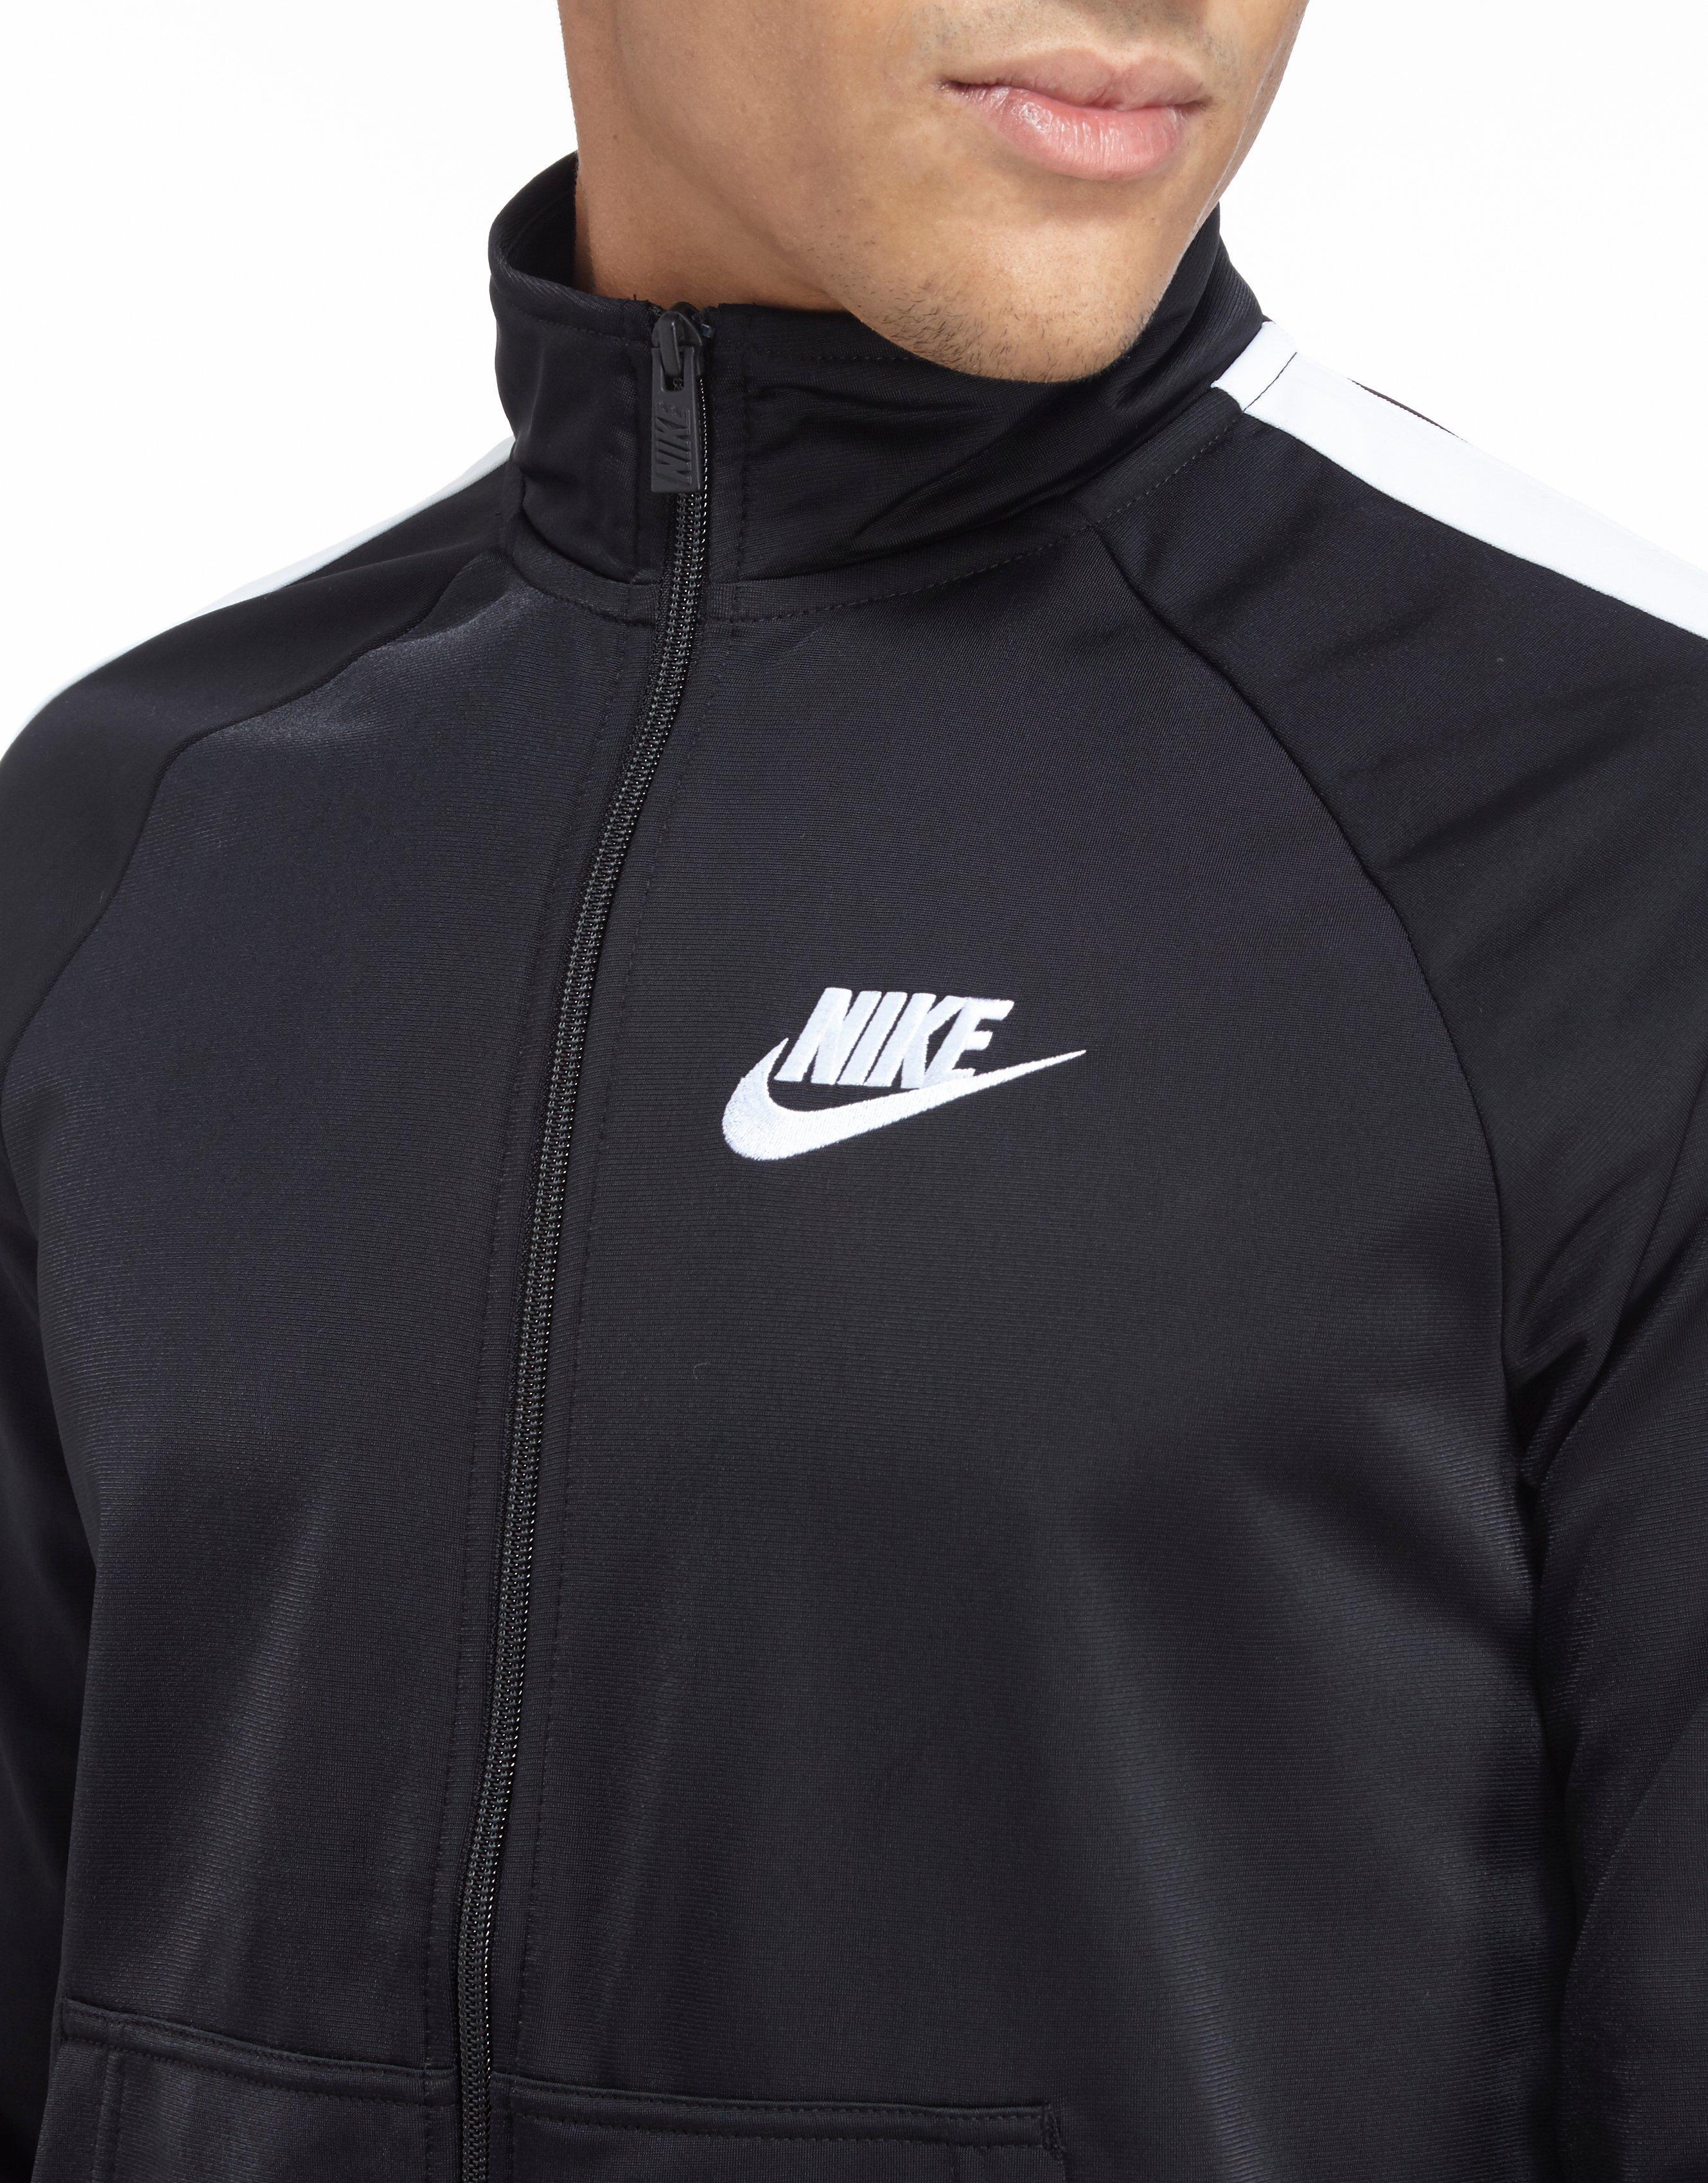 Nike Synthetic Season Poly Tracksuit in Black/White (Black) for Men - Lyst